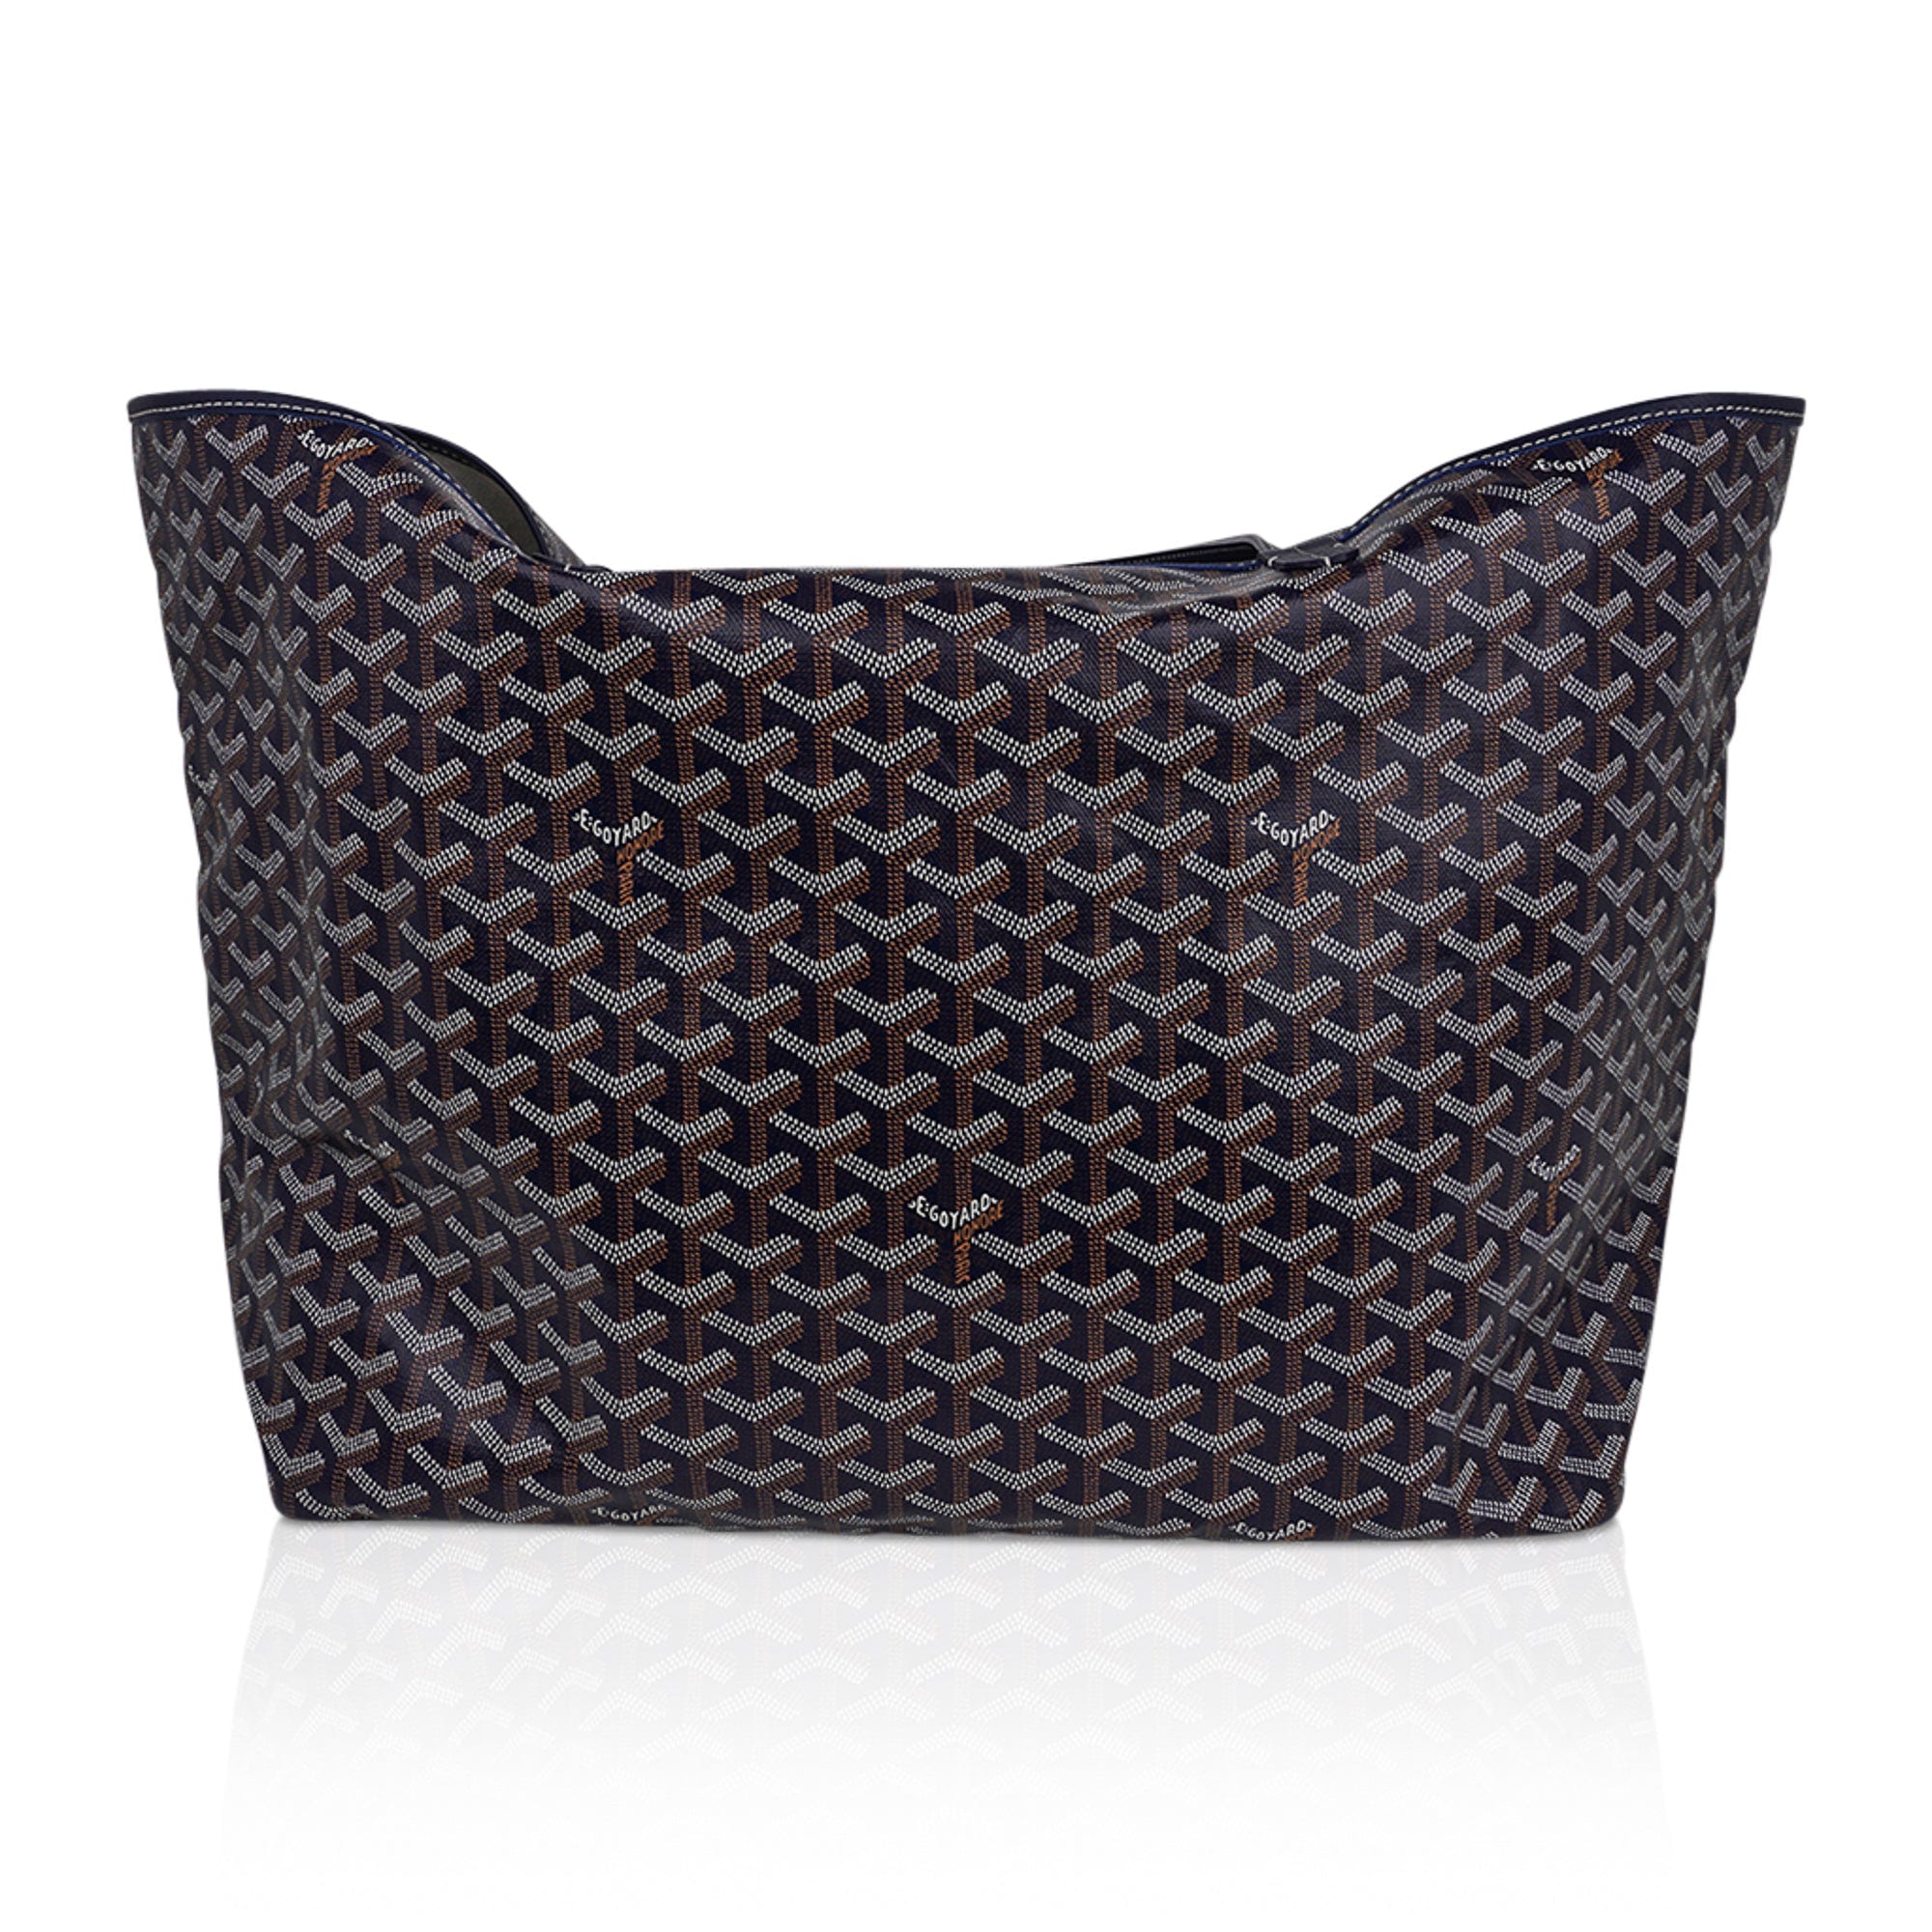 Goyard, Chrome Hearts and more from this weeks new arrivals